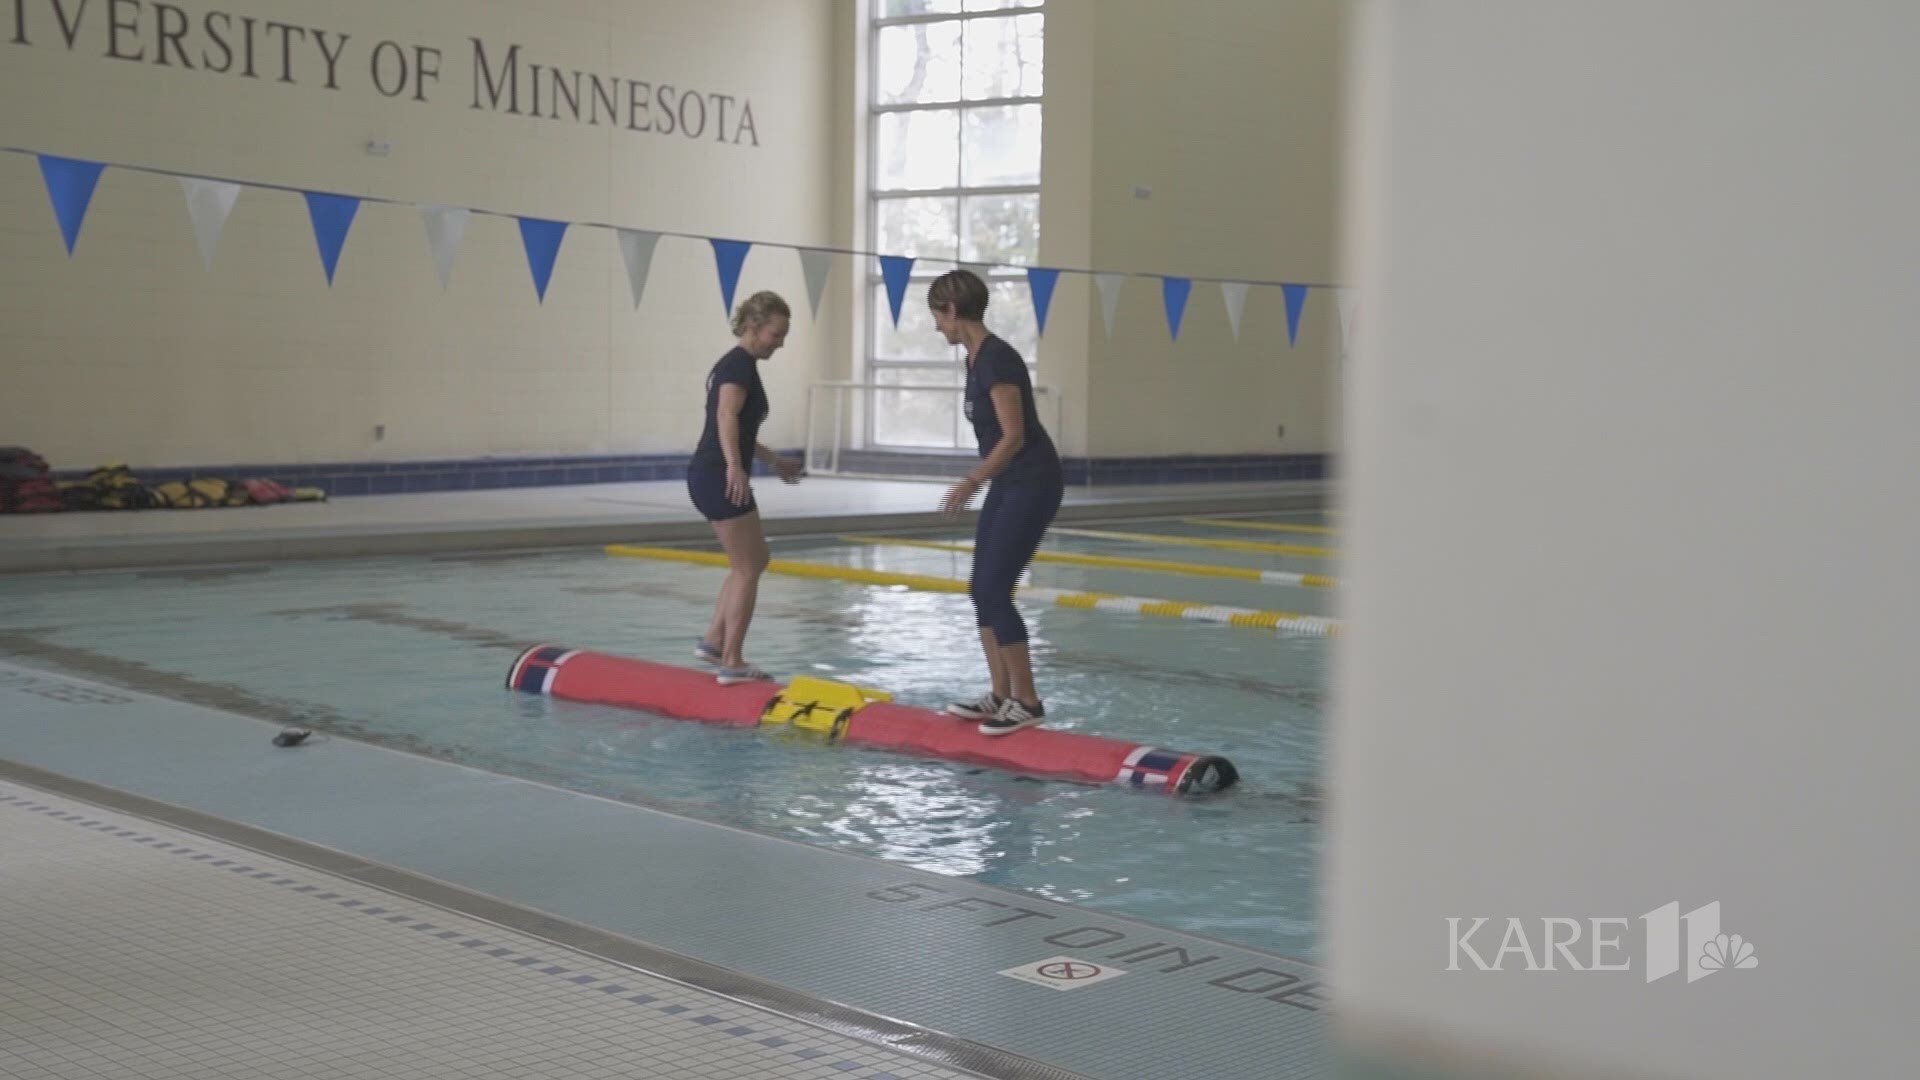 Judy Scheer Hoeschler and Abby Hoeschler Delaney have launched Key Log Rolling - a company aimed at growing the sport of log rolling across the globe. https://kare11.tv/2IdK0ZQ